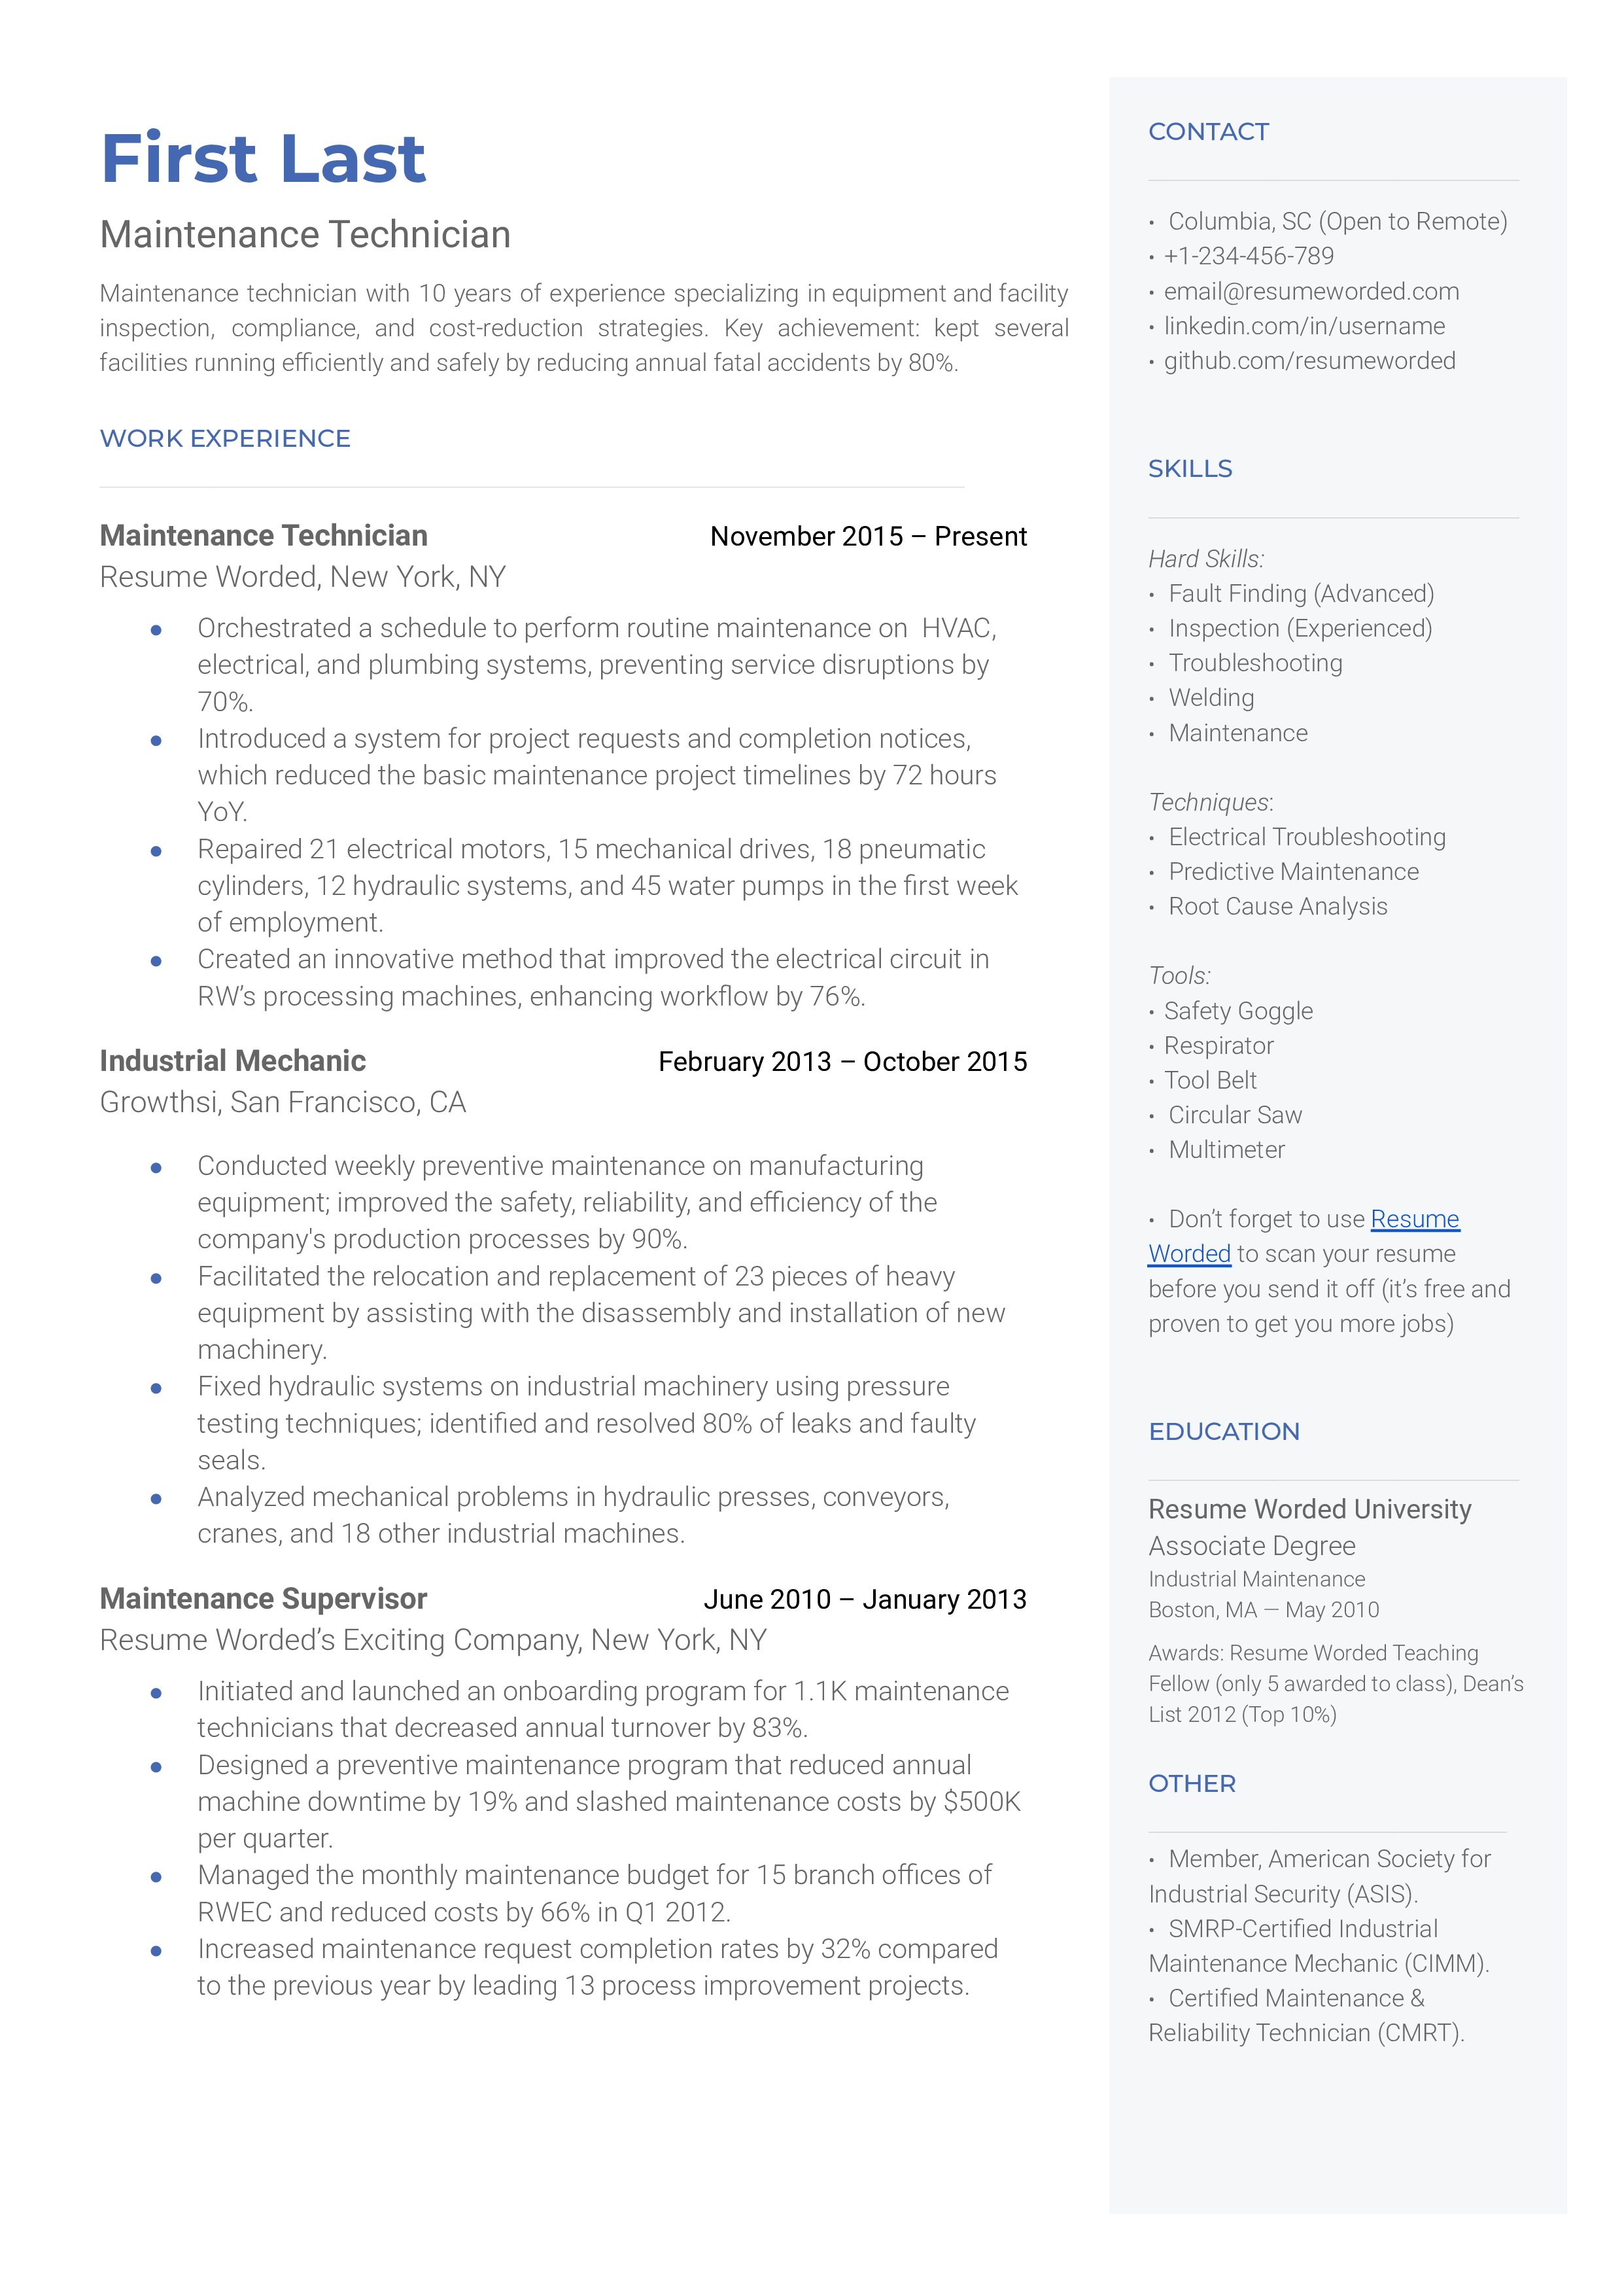 An organized and detailed CV for a Maintenance Technician role.